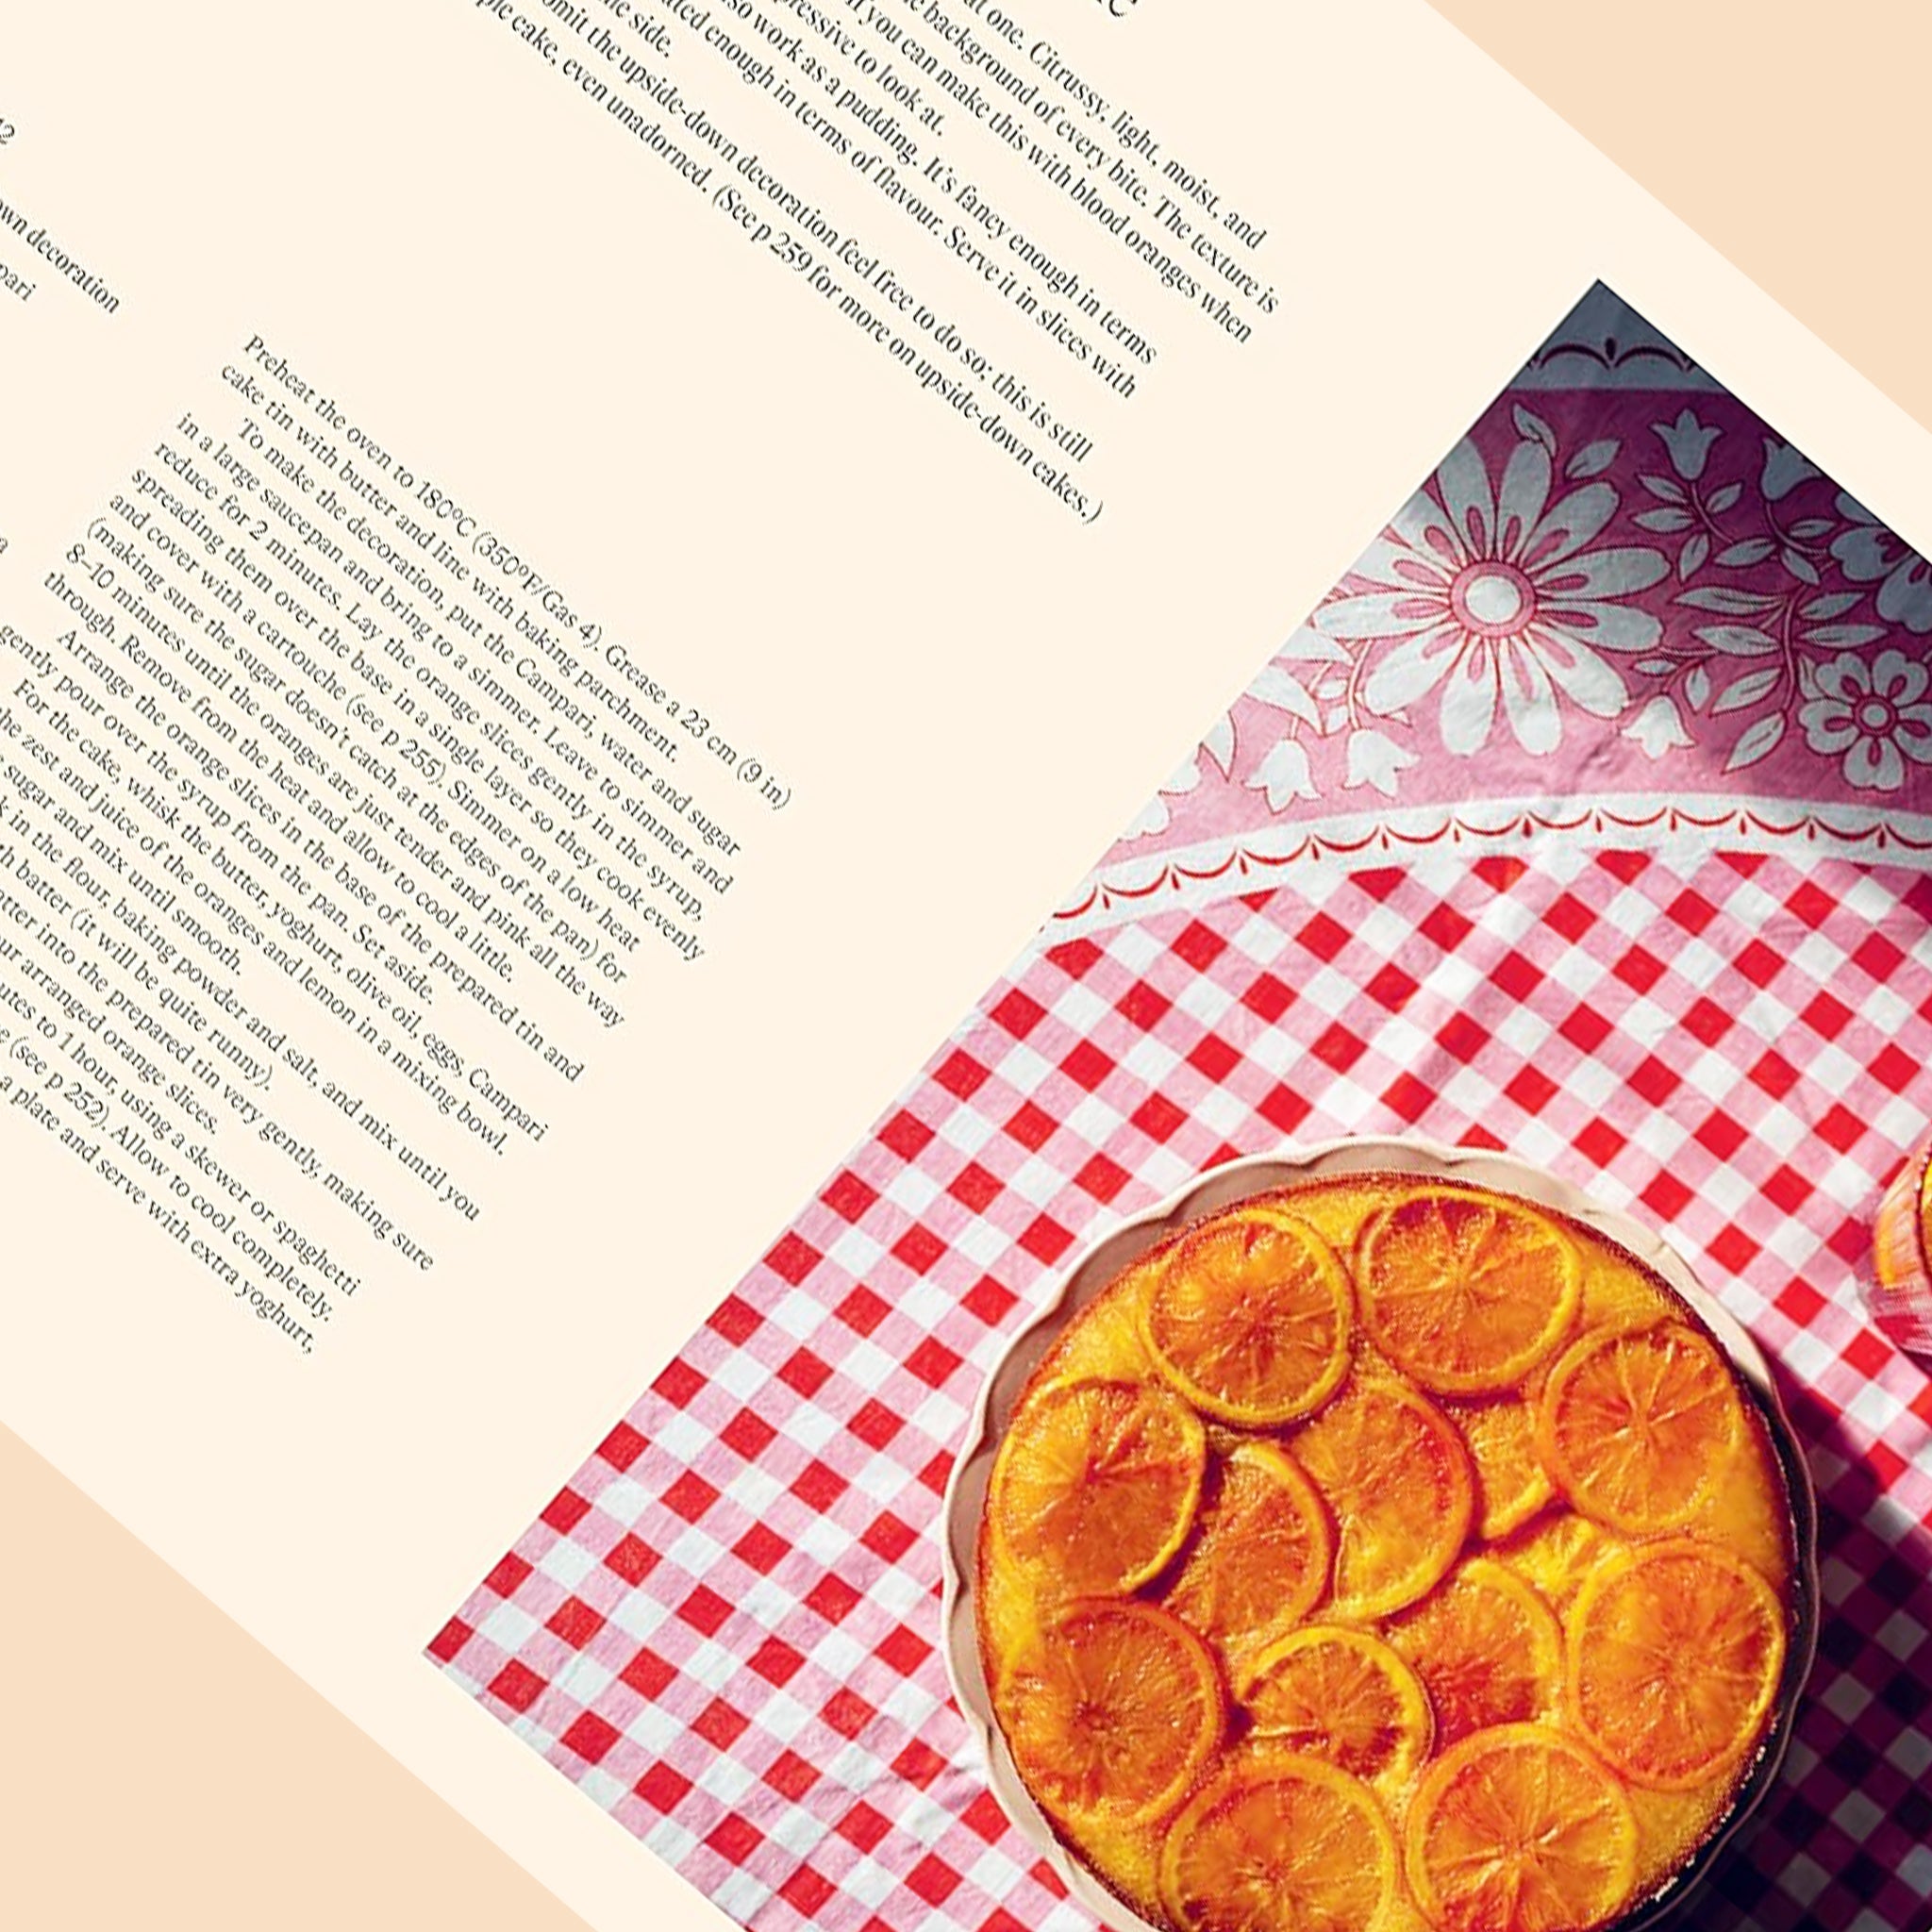 On a tan background is the book open to a page of the book with text on the left side and a citrus cake photograph on the right side. 